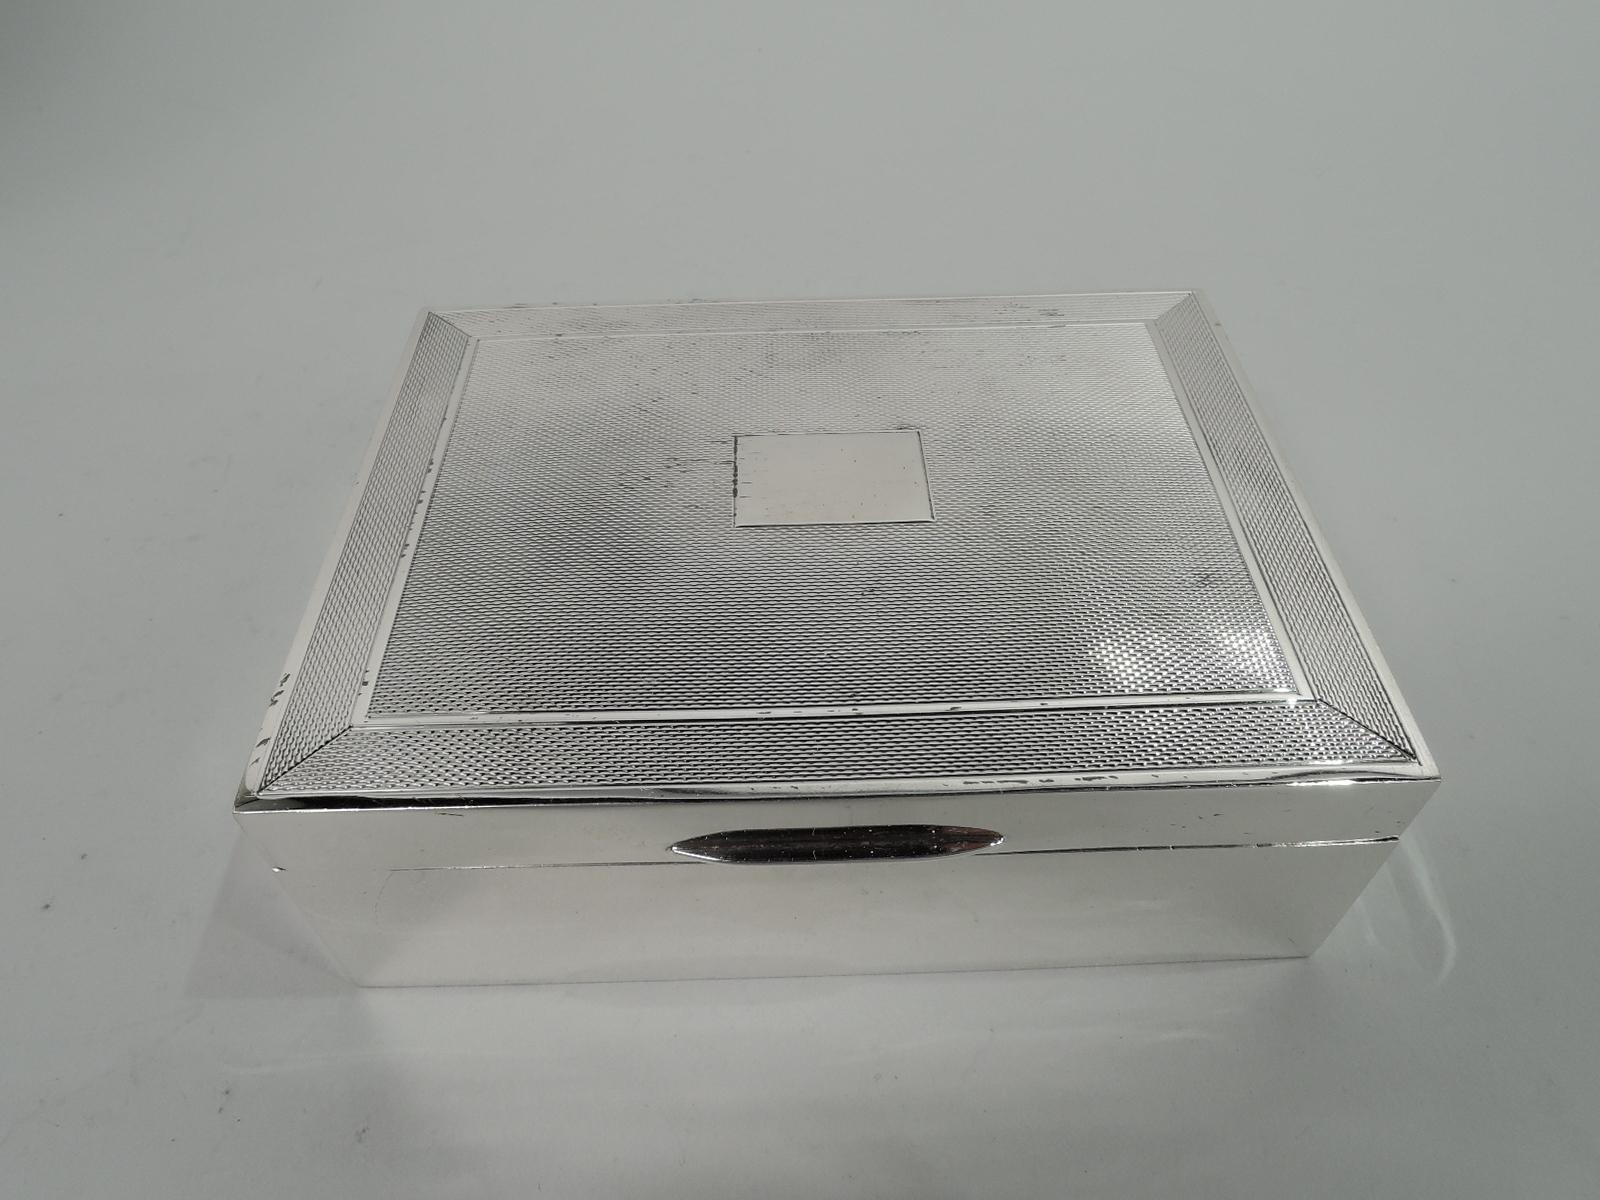 Art Deco sterling silver box. Made by John Rose Birmingham in 1969. Rectangular with plain straight sides. Cover hinged with tapering tab. Cover top has central mono plate (vacant) surrounded by engine-turned ornament and same border in plain